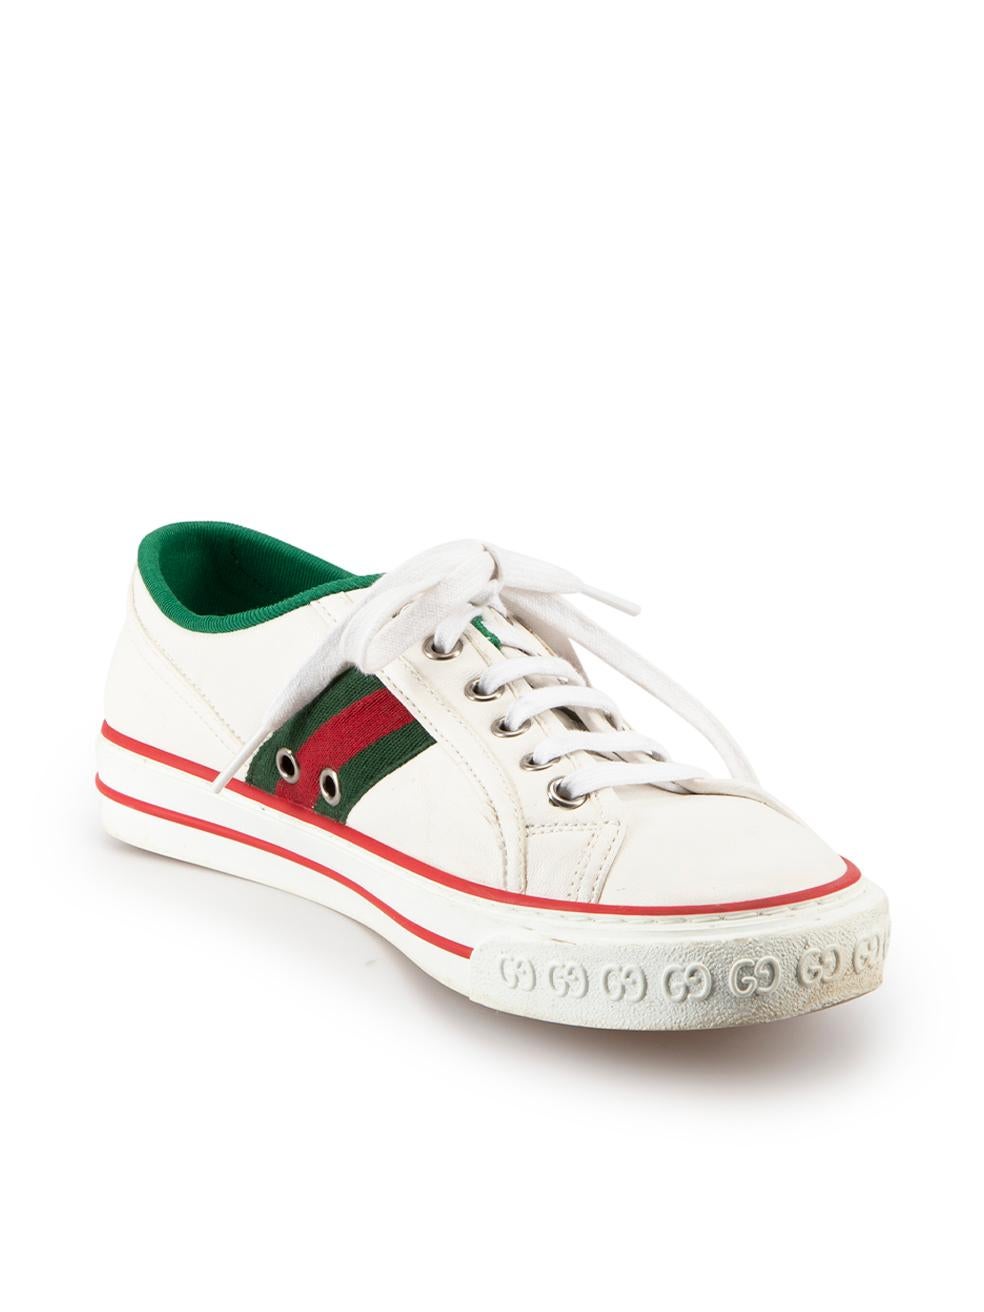 CONDITION is Very Good. Minimal wear to trainers is evident. Minimal wear to upper with a number of small marks at toe, tongue and quarter as well as mild discolouration and erosion of the midsole on this used Gucci designer resale